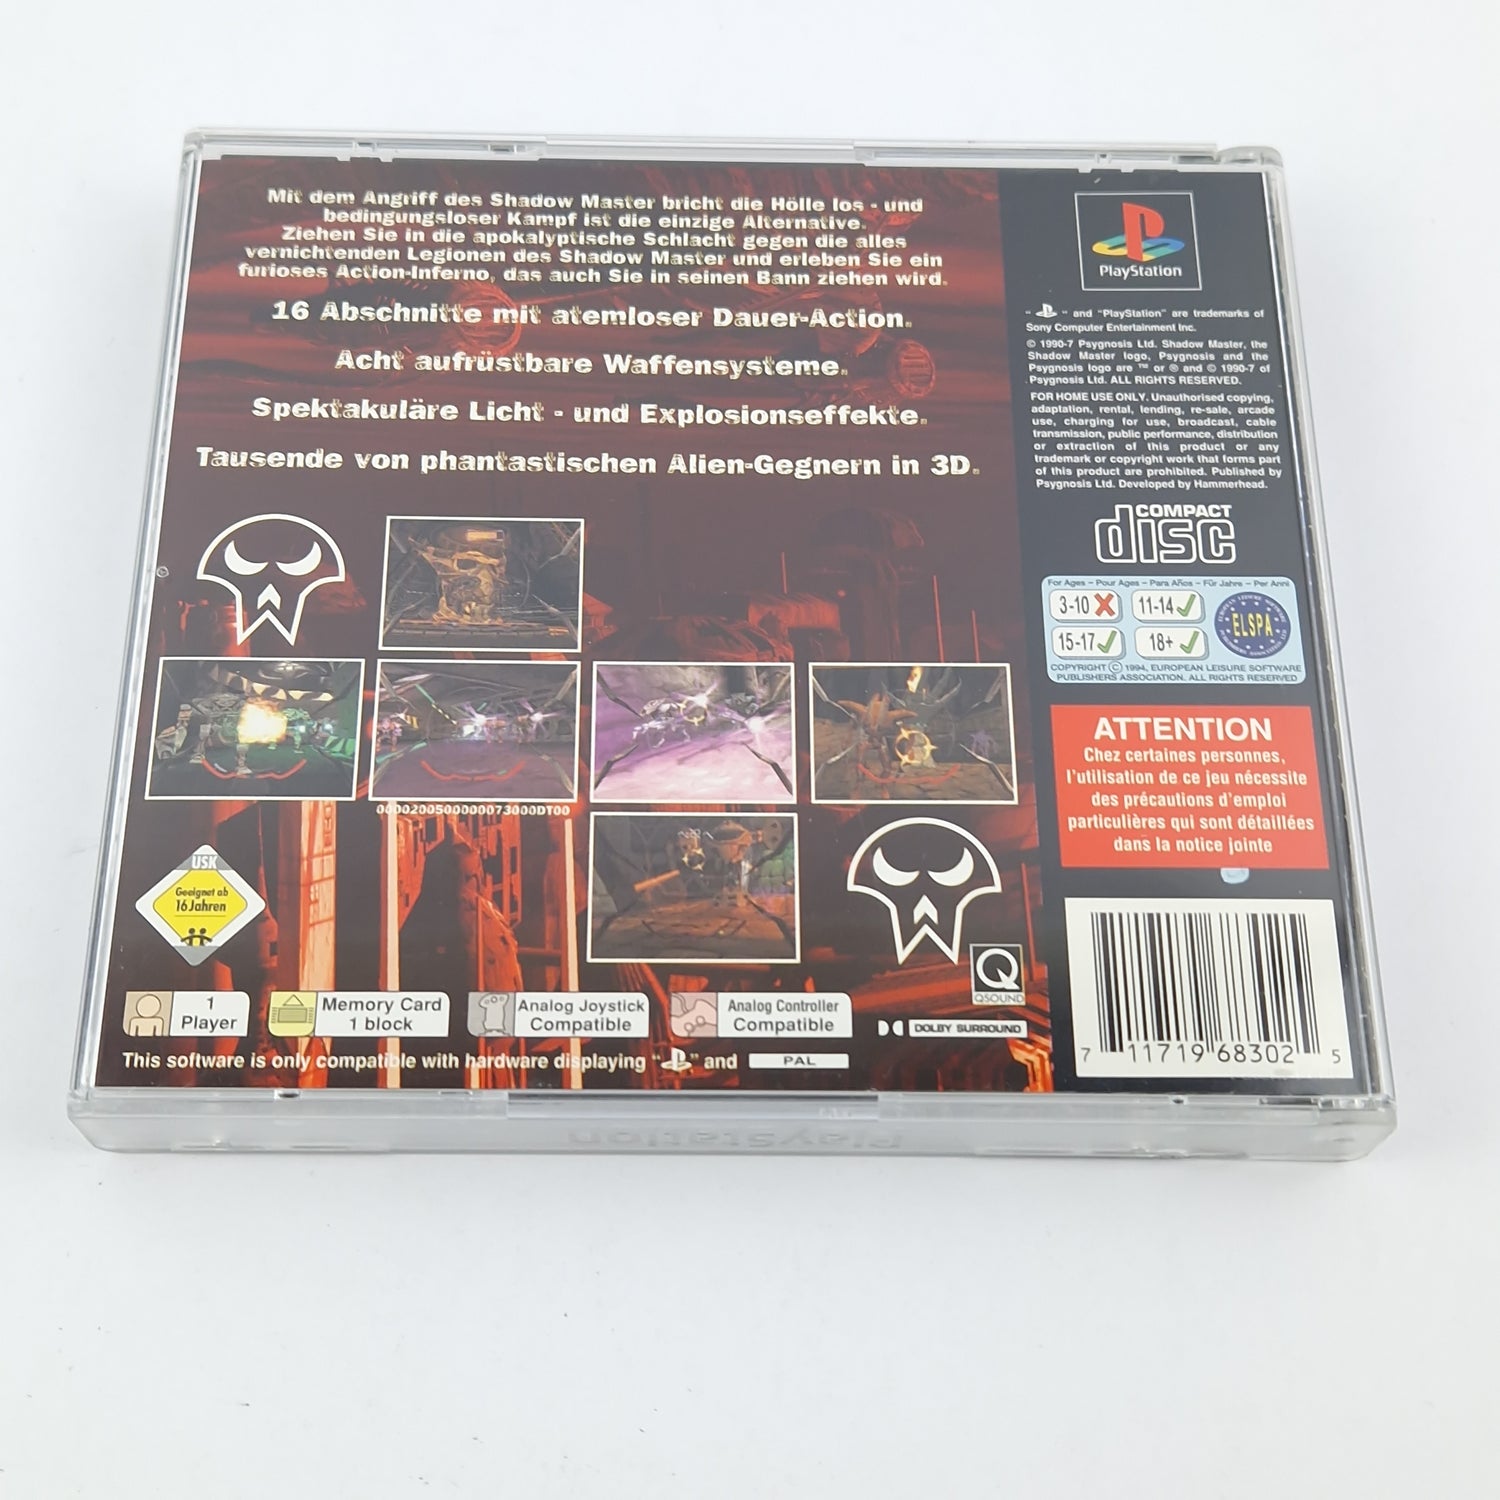 Playstation 1 game: Shadowmaster - OVP instructions CD / SONY PS1 PSX PAL